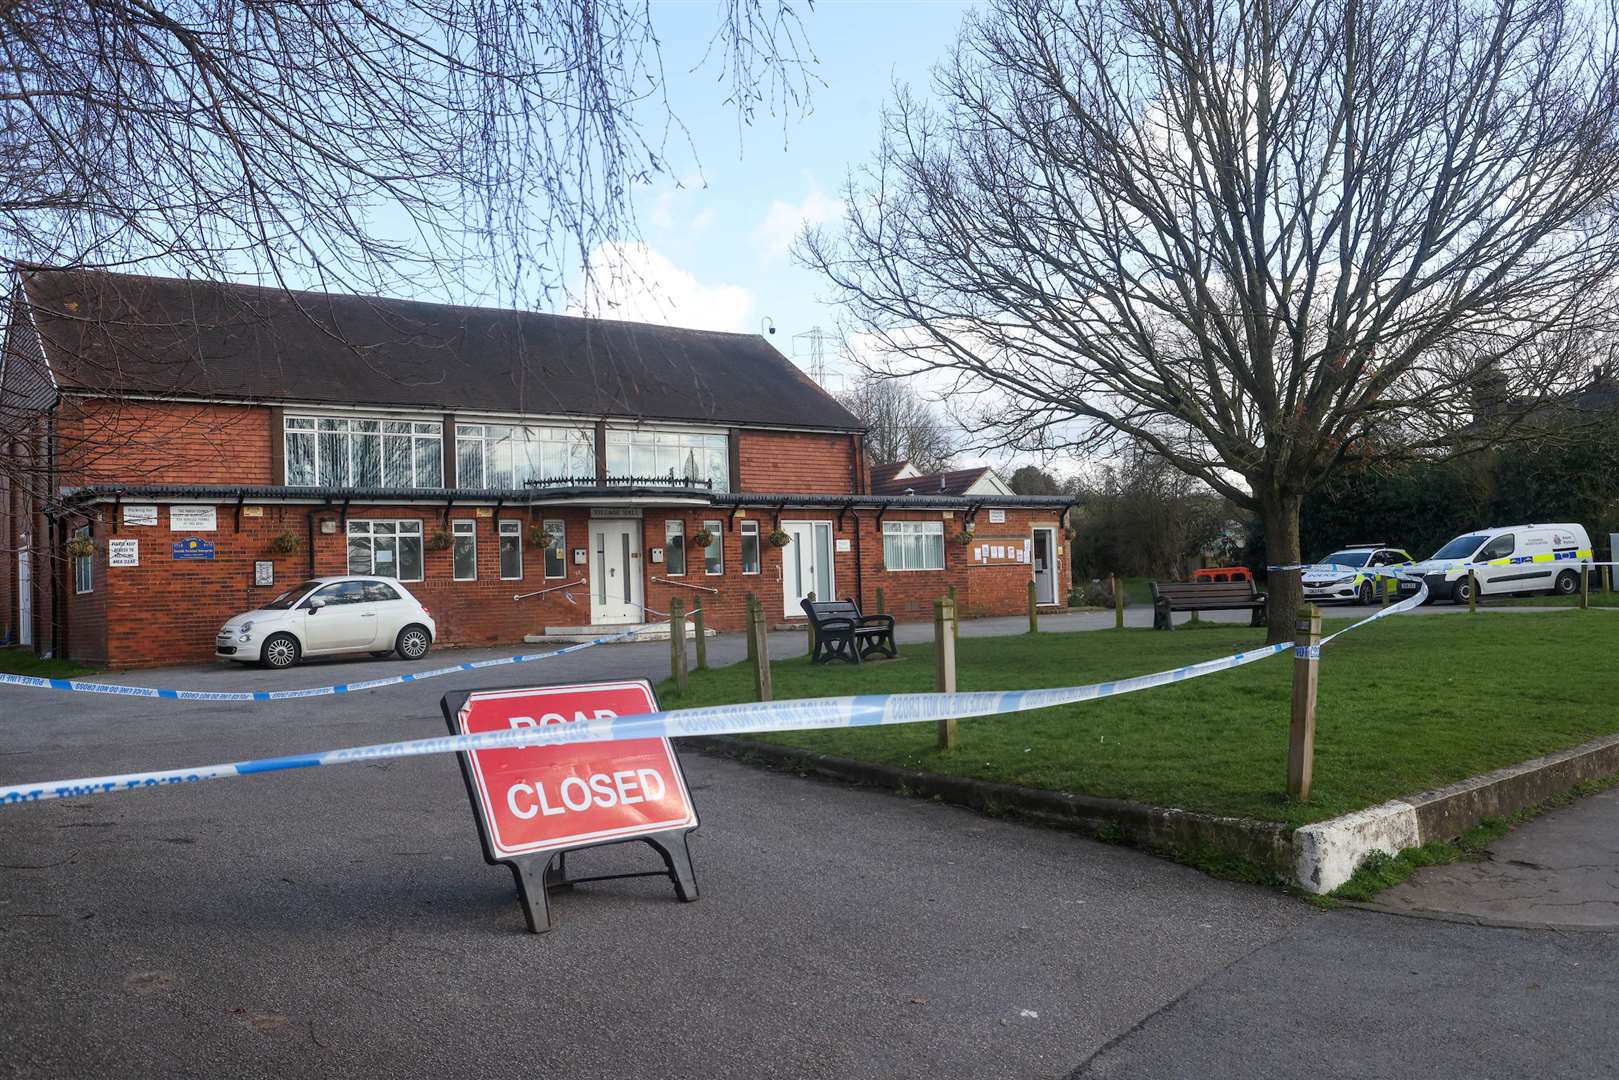 The entrance to Horton Kirby and South Darenth Village Hall was taped off by police. Images: UKNIP